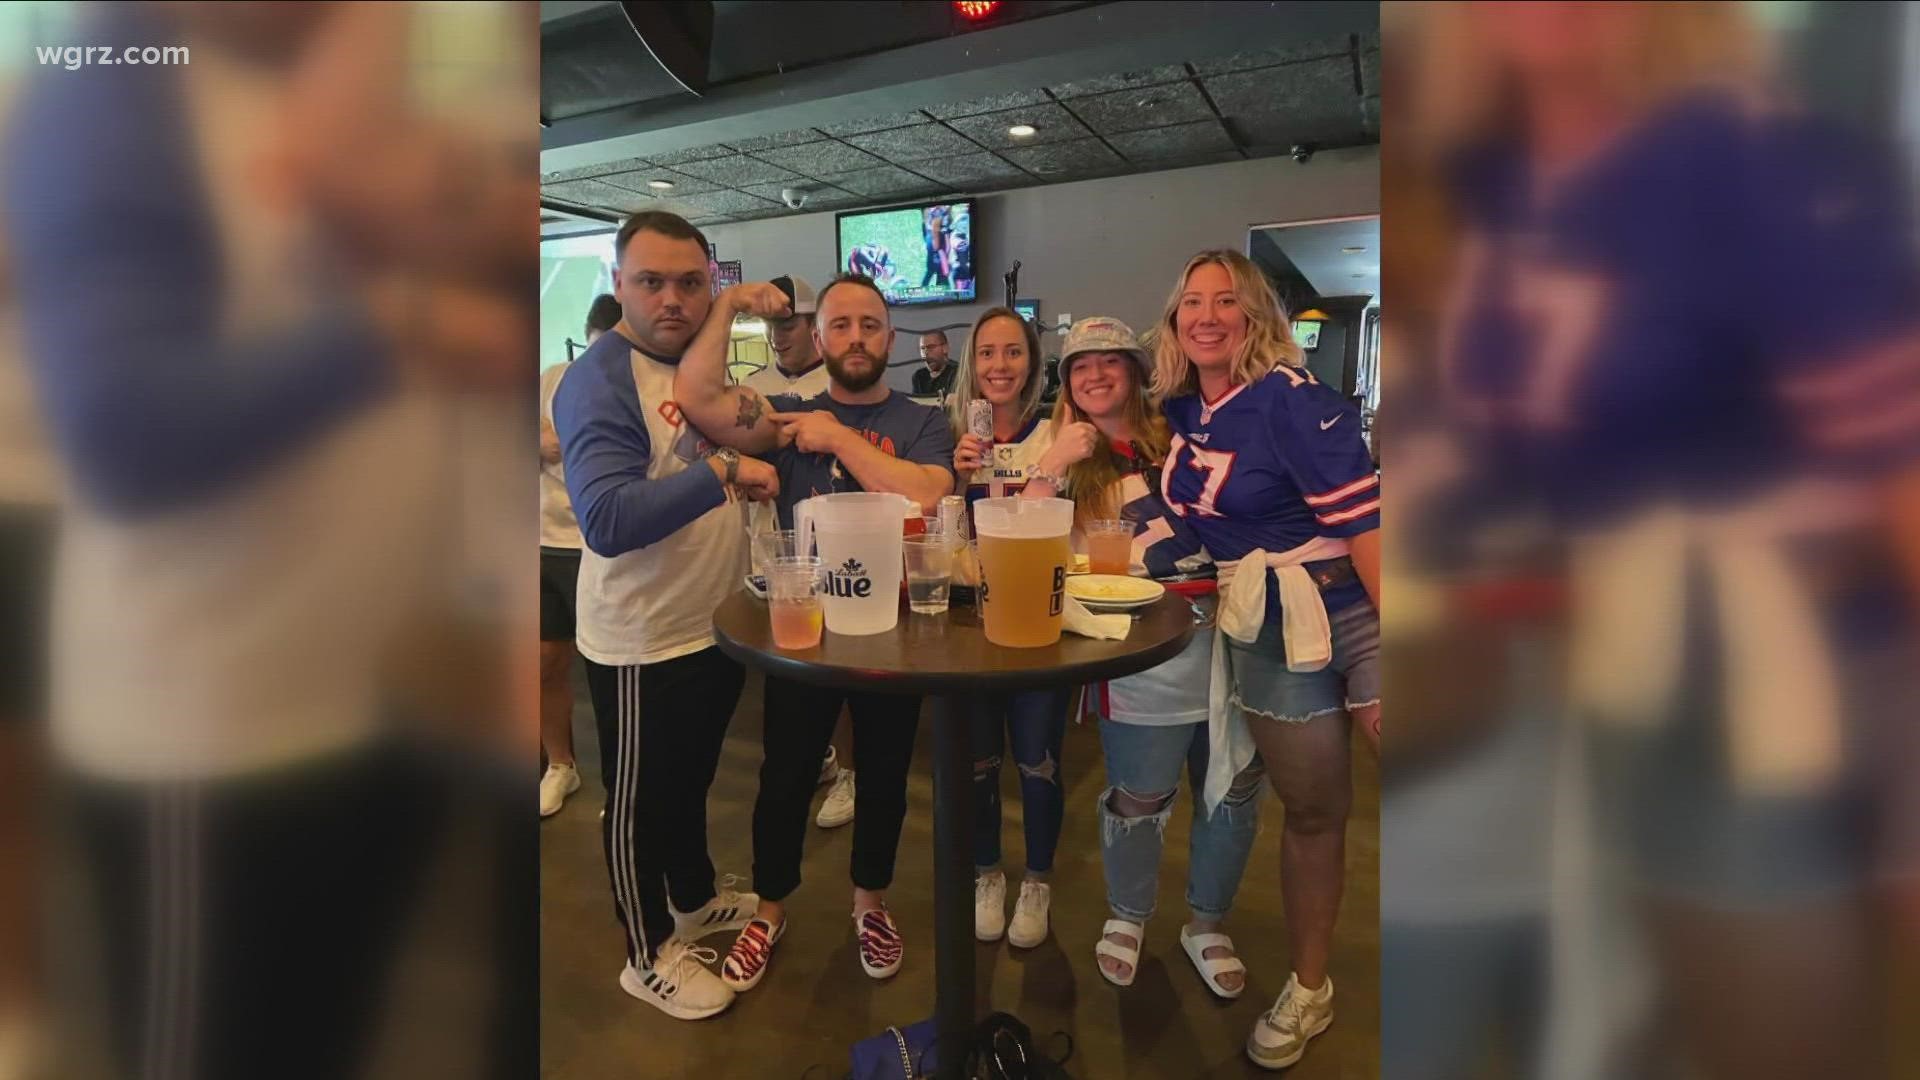 Boston Bills fans excited for game